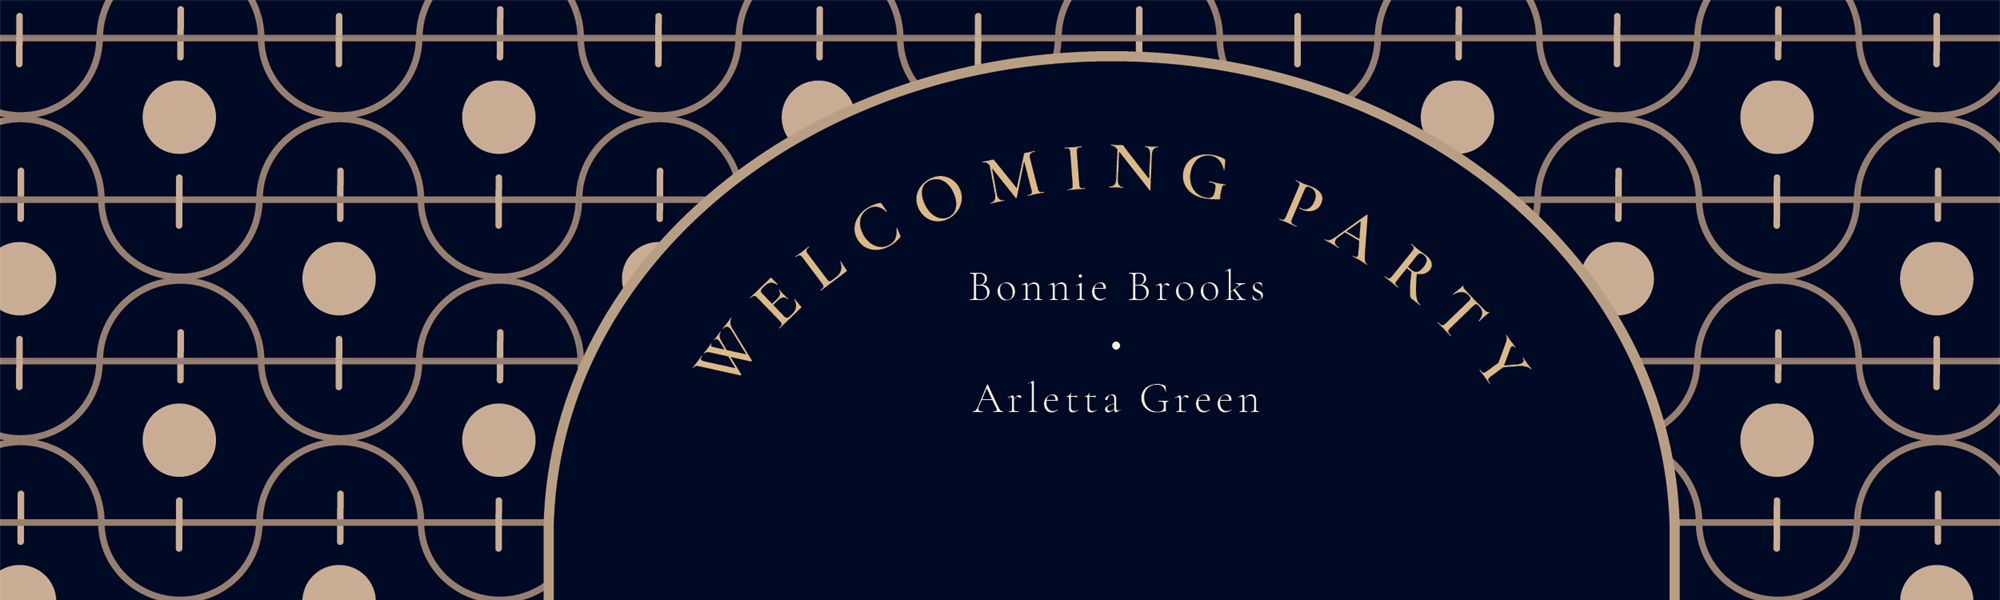 Meet and Greet to Welcome Bonnie Brooks and Arletta Green!